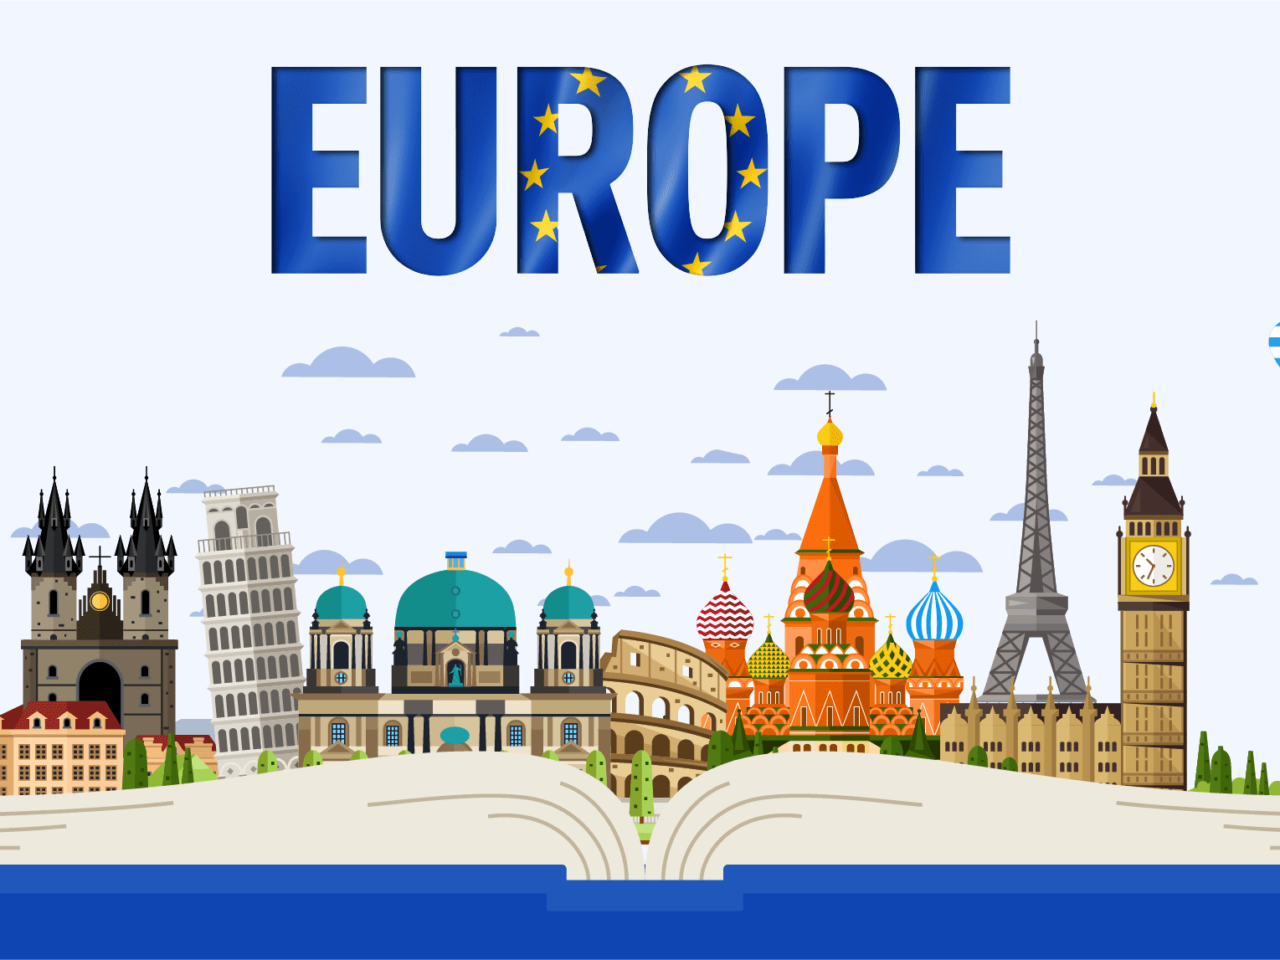 https://amoldeglobalmigration.com/wp-content/uploads/2021/04/Unique-Courses-to-Study-in-Europe-1280x960.png